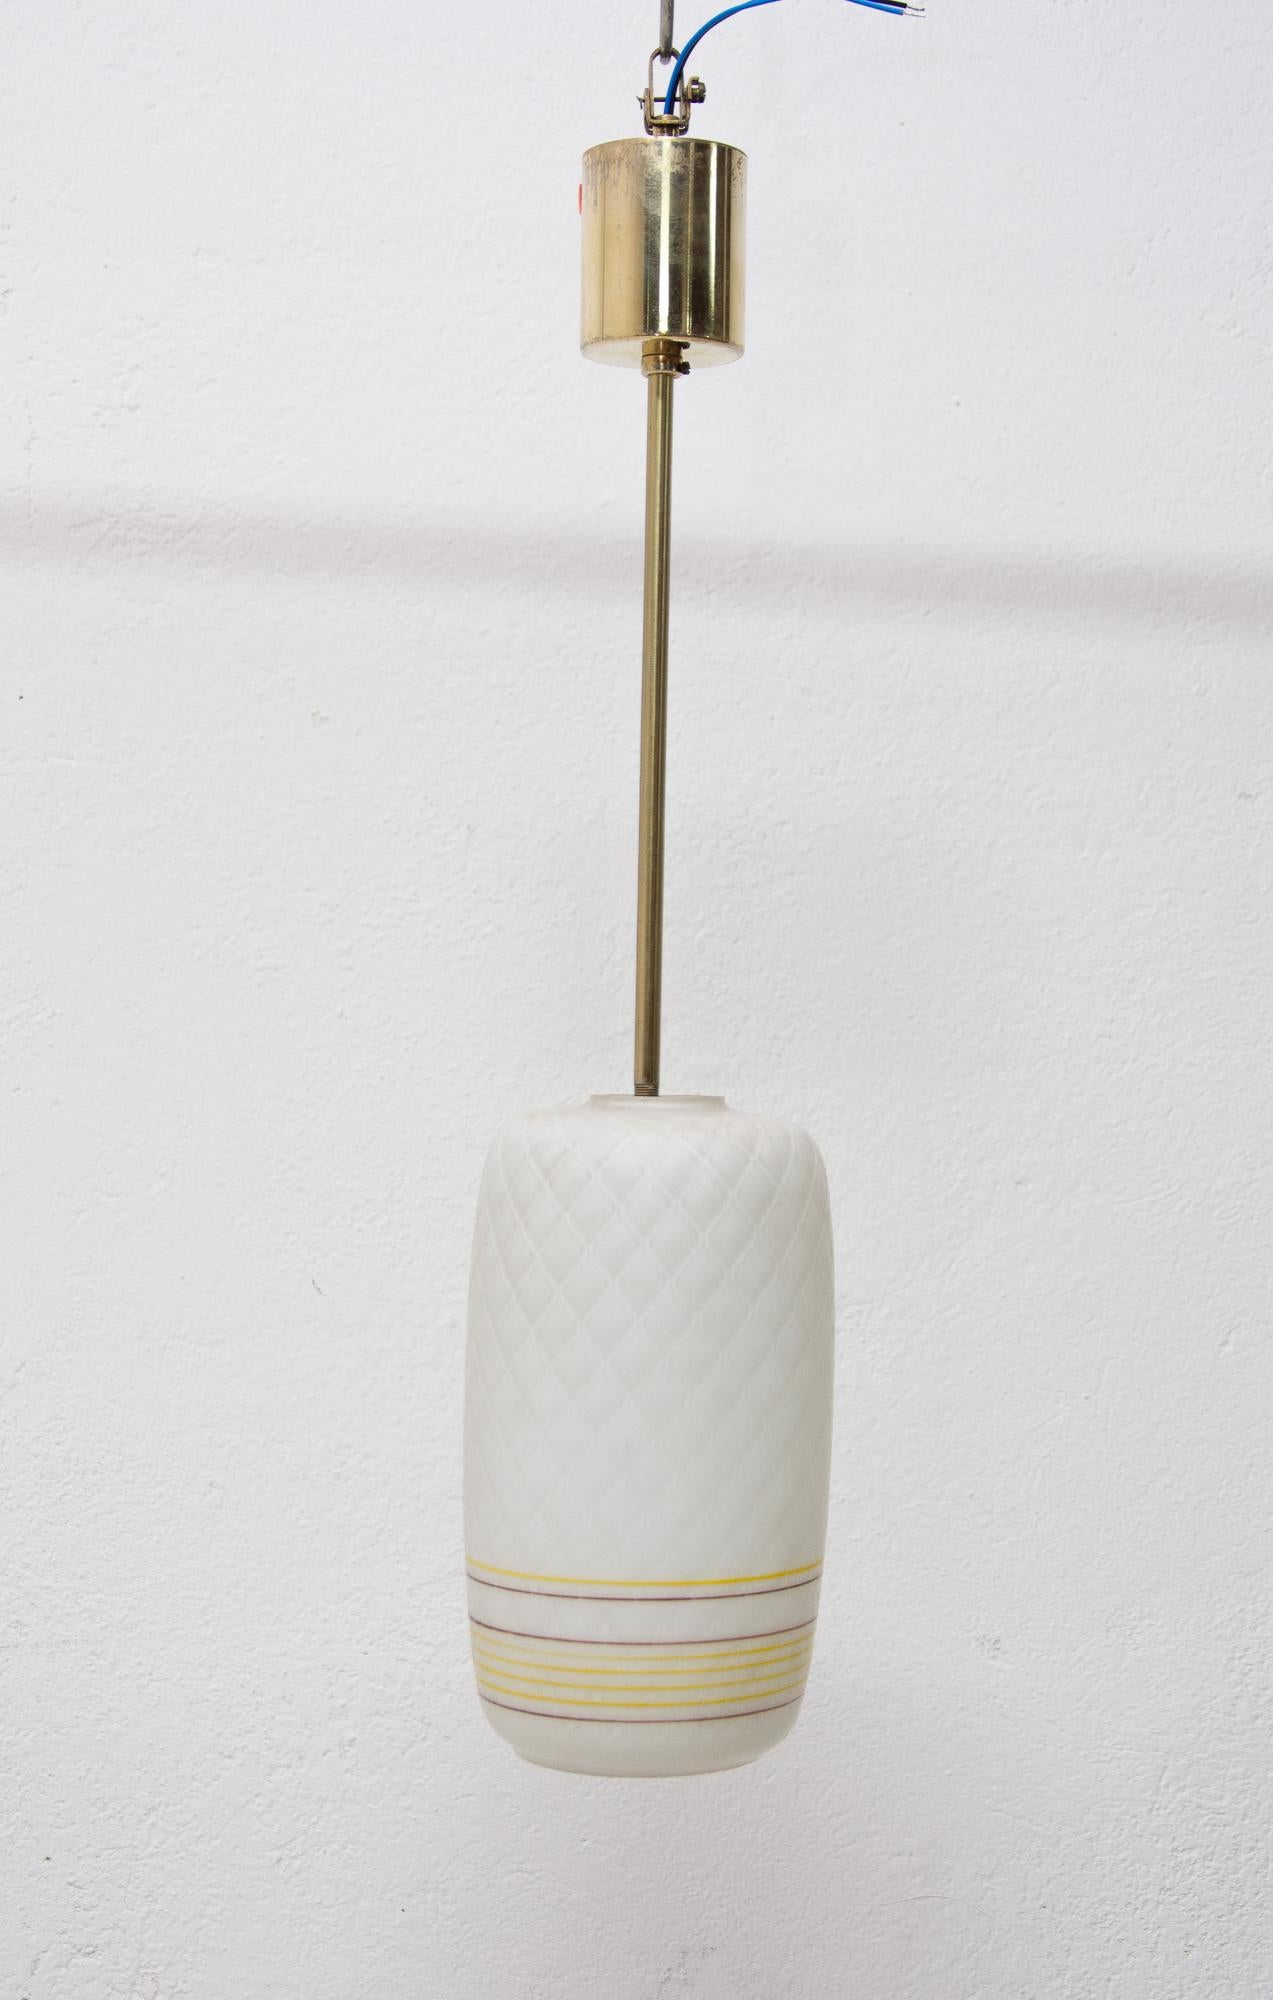 Plated Midcentury Hanging Lamp-Pendant, 1960s, Czechoslovakia For Sale